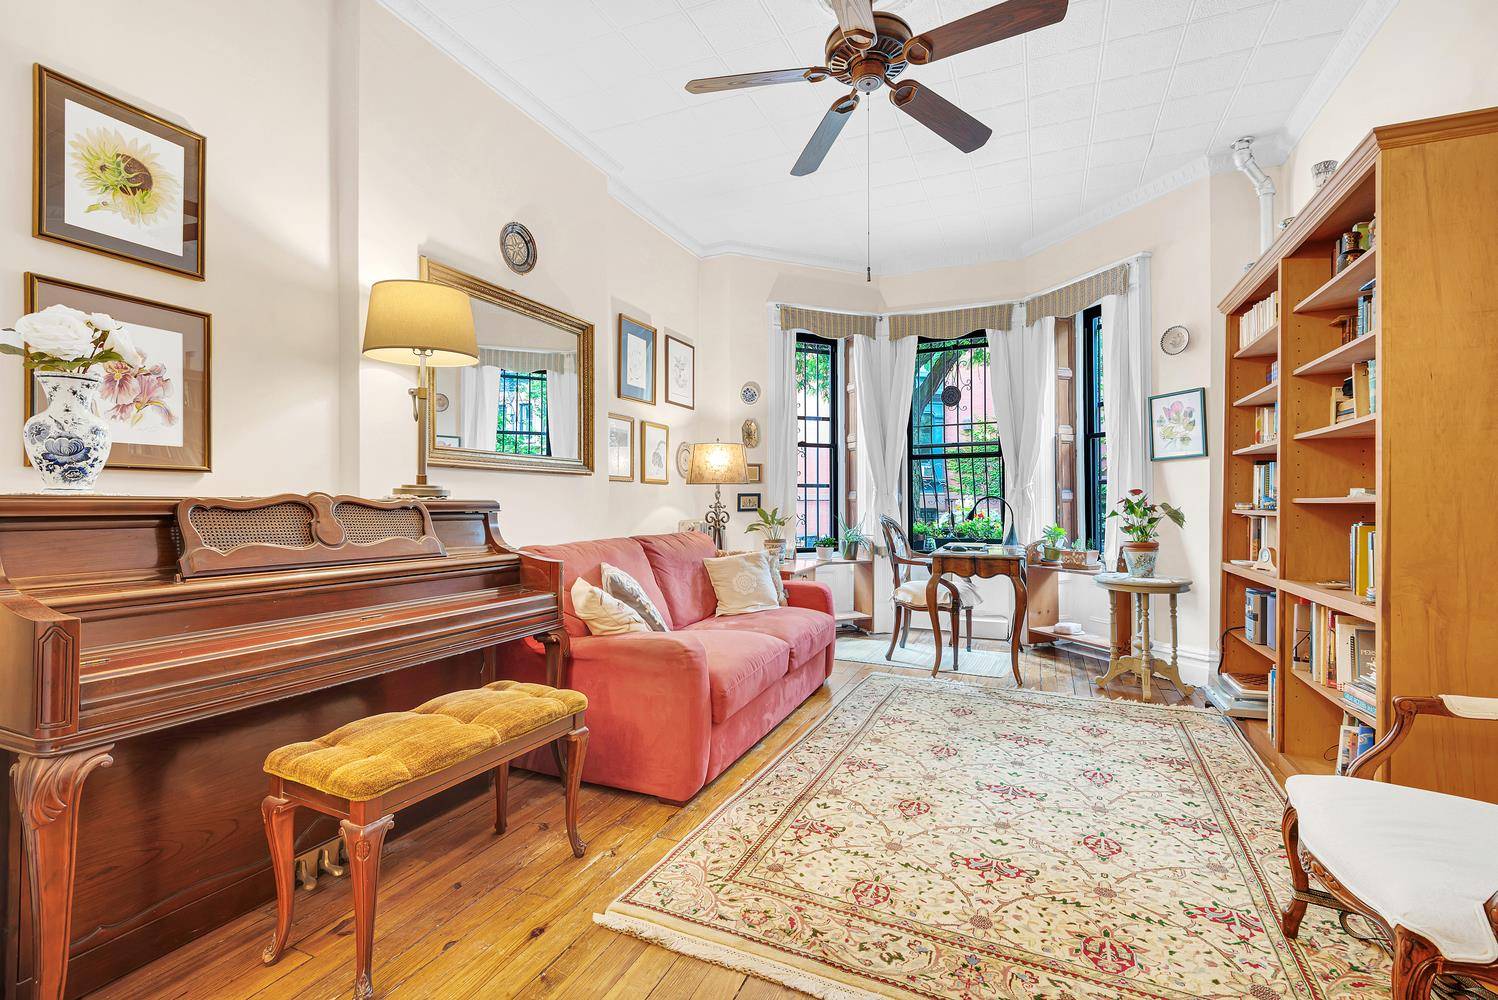 ALL SHOWINGS AND OPEN HOUSES ARE BY APPOINTMENT ONLY Historic charm and elegance are perfectly reflected in this spacious 2 bedroom apartment on a coveted tree lined block, in a ...